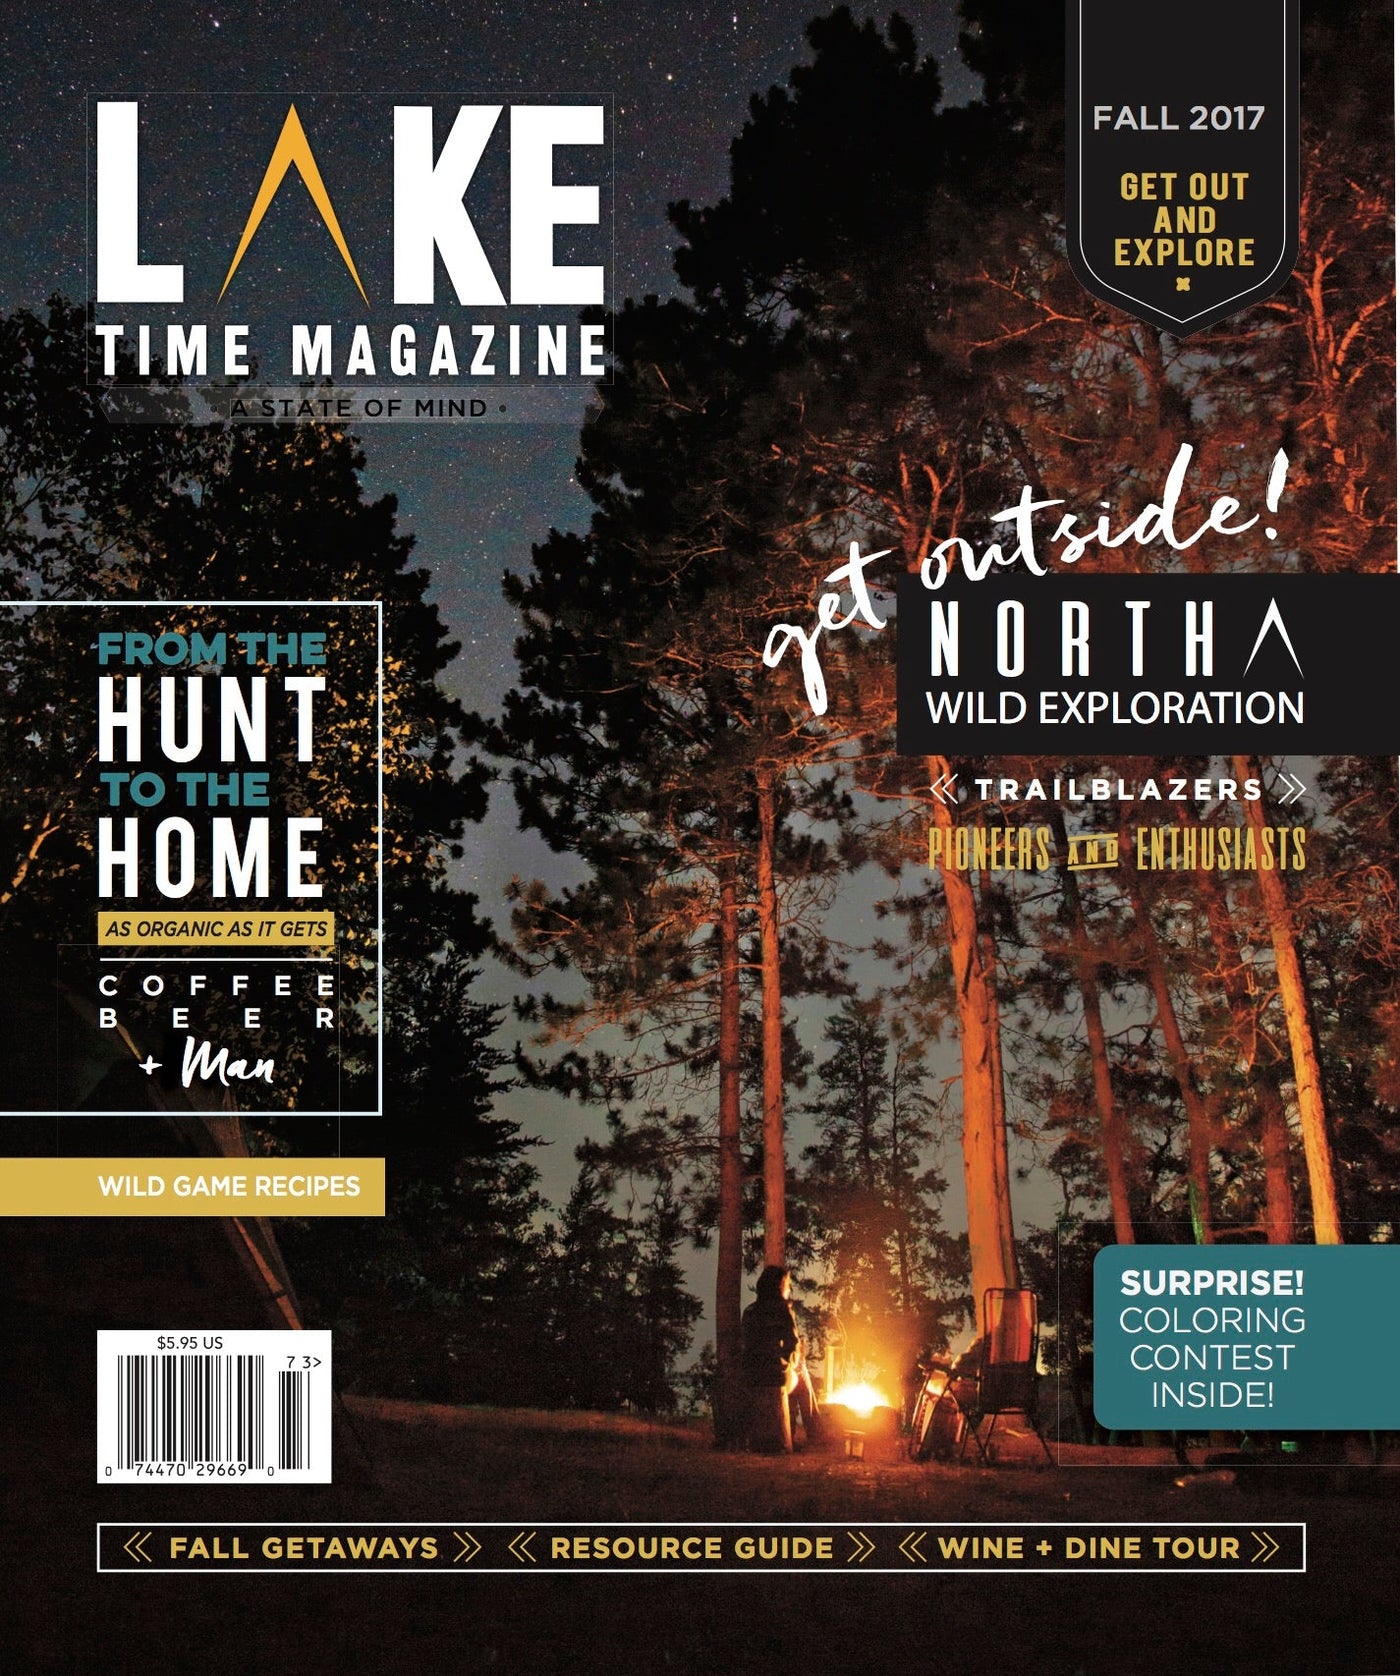 Lake Time Magazine: Issue 9 - The Lake and Company